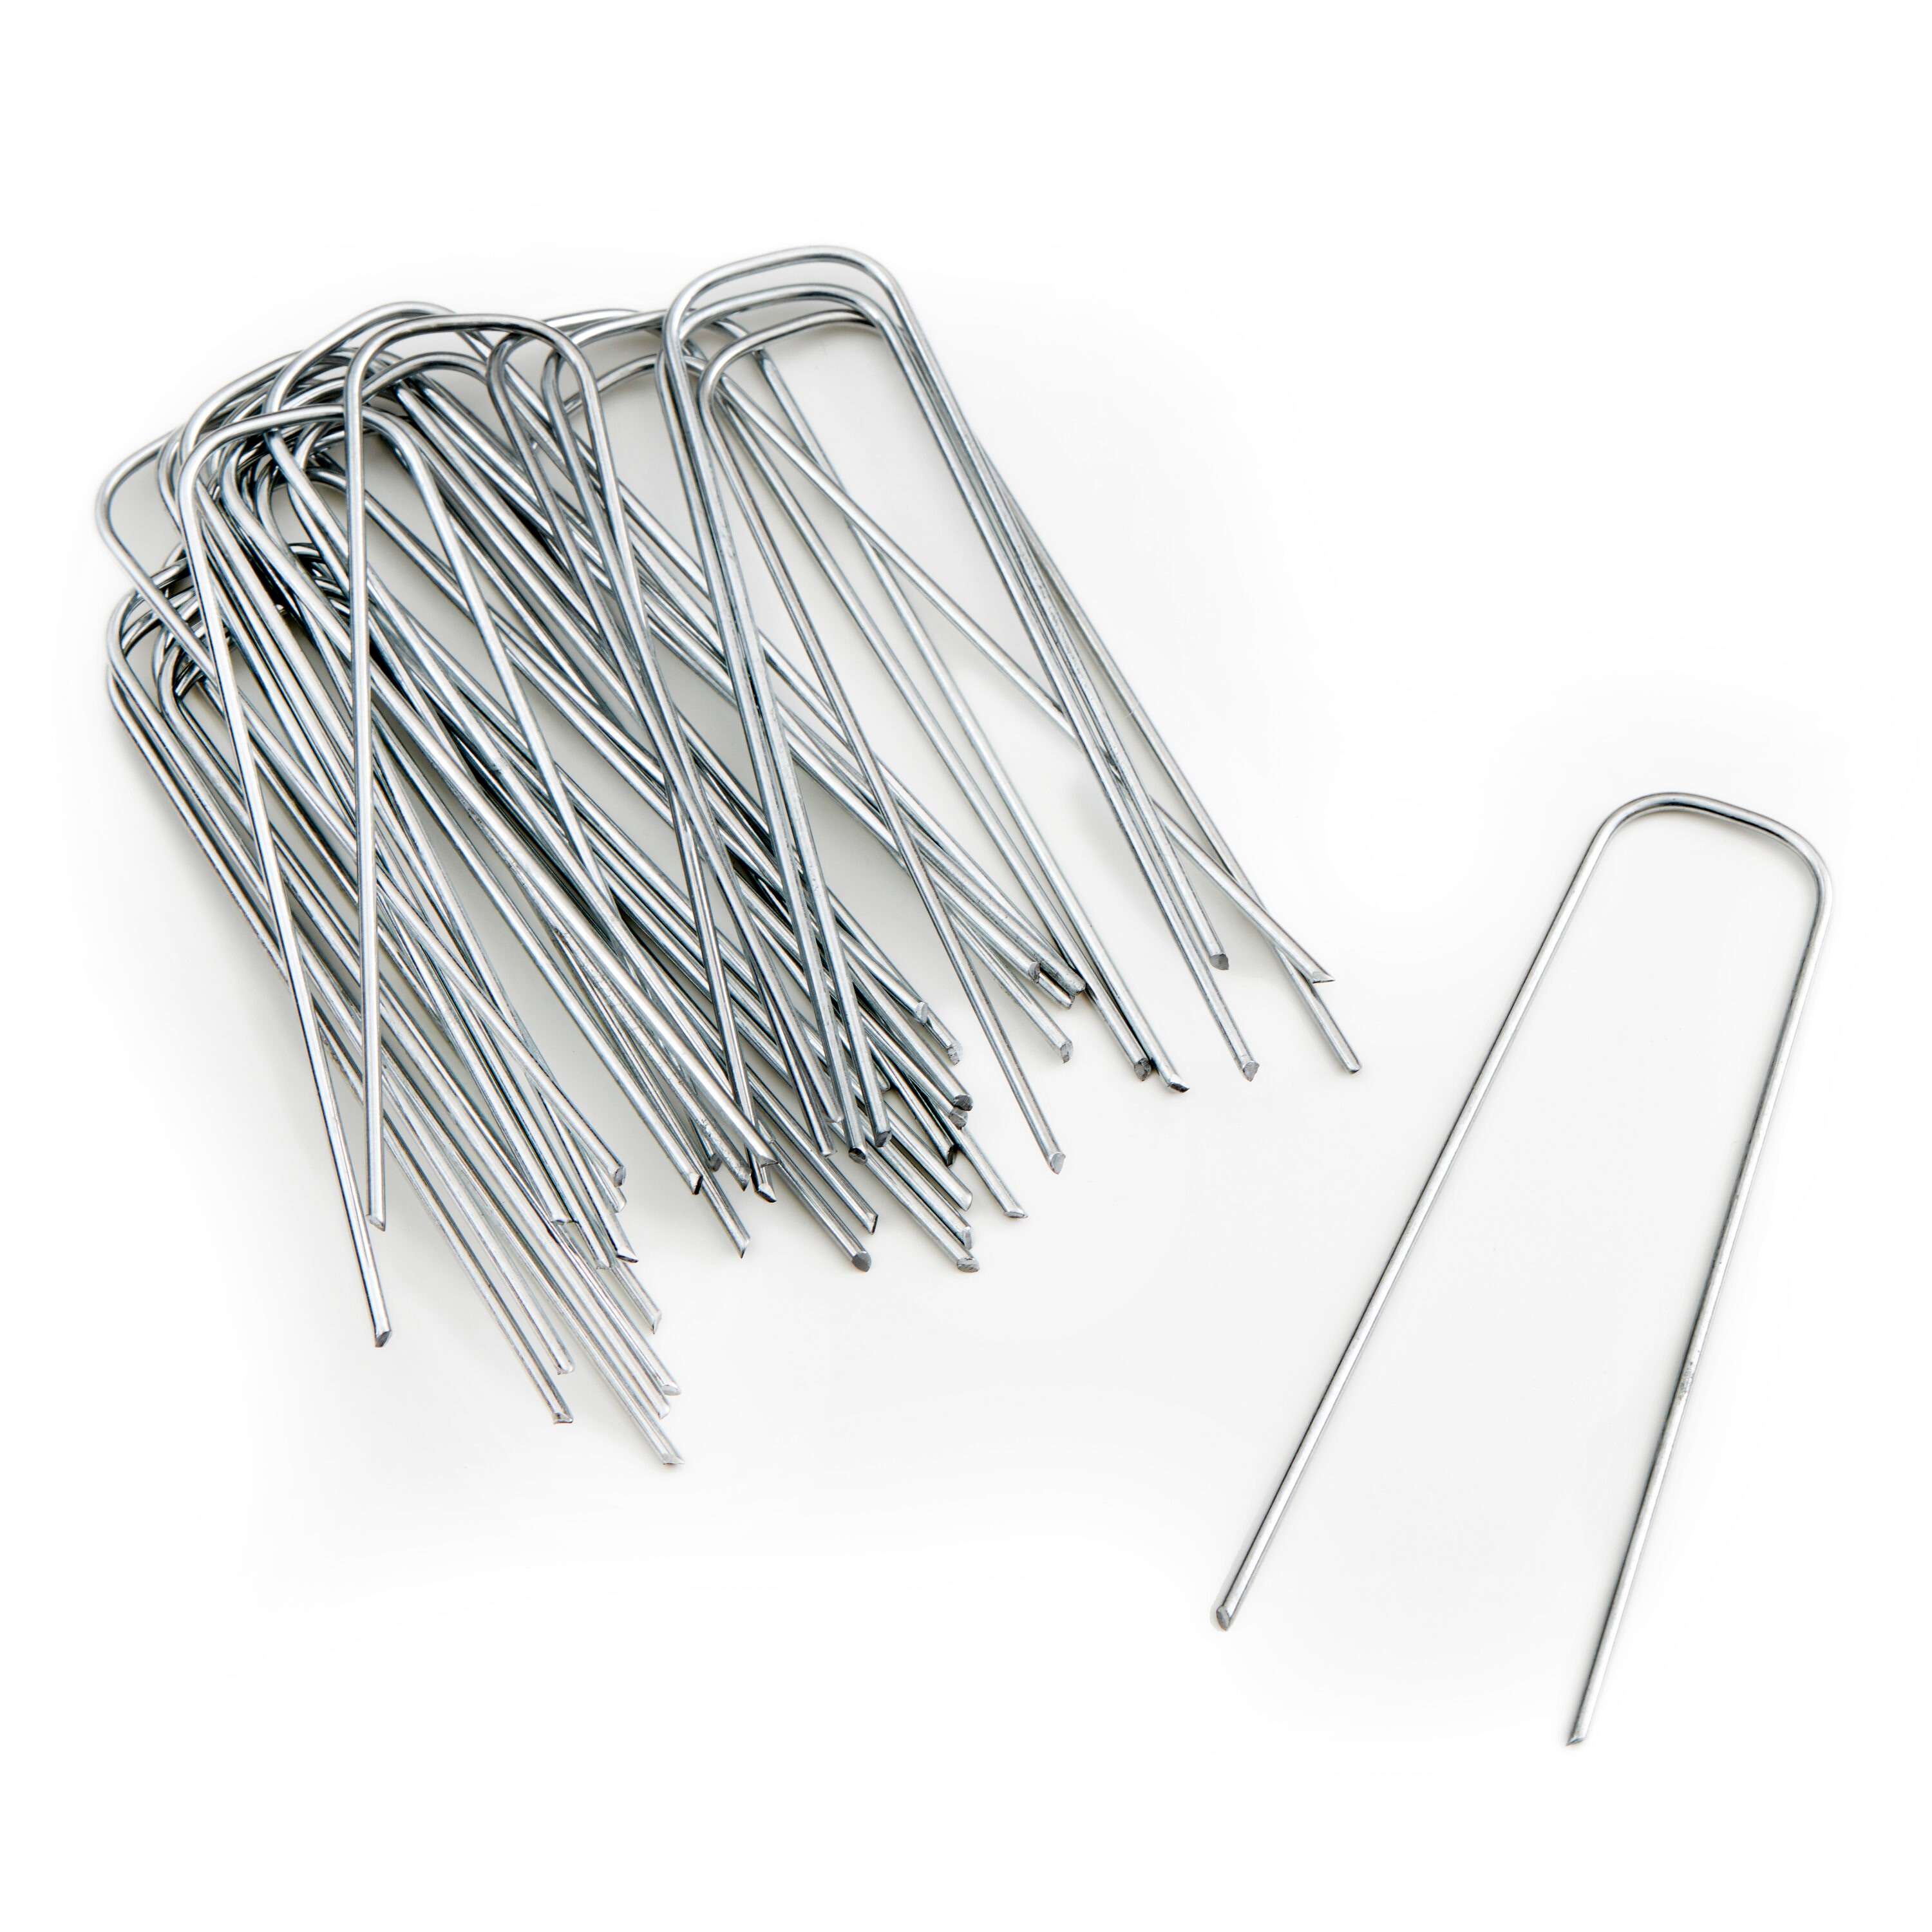 Traditional Steel Safety Pins - Wholesale Prices on Safety Pins by